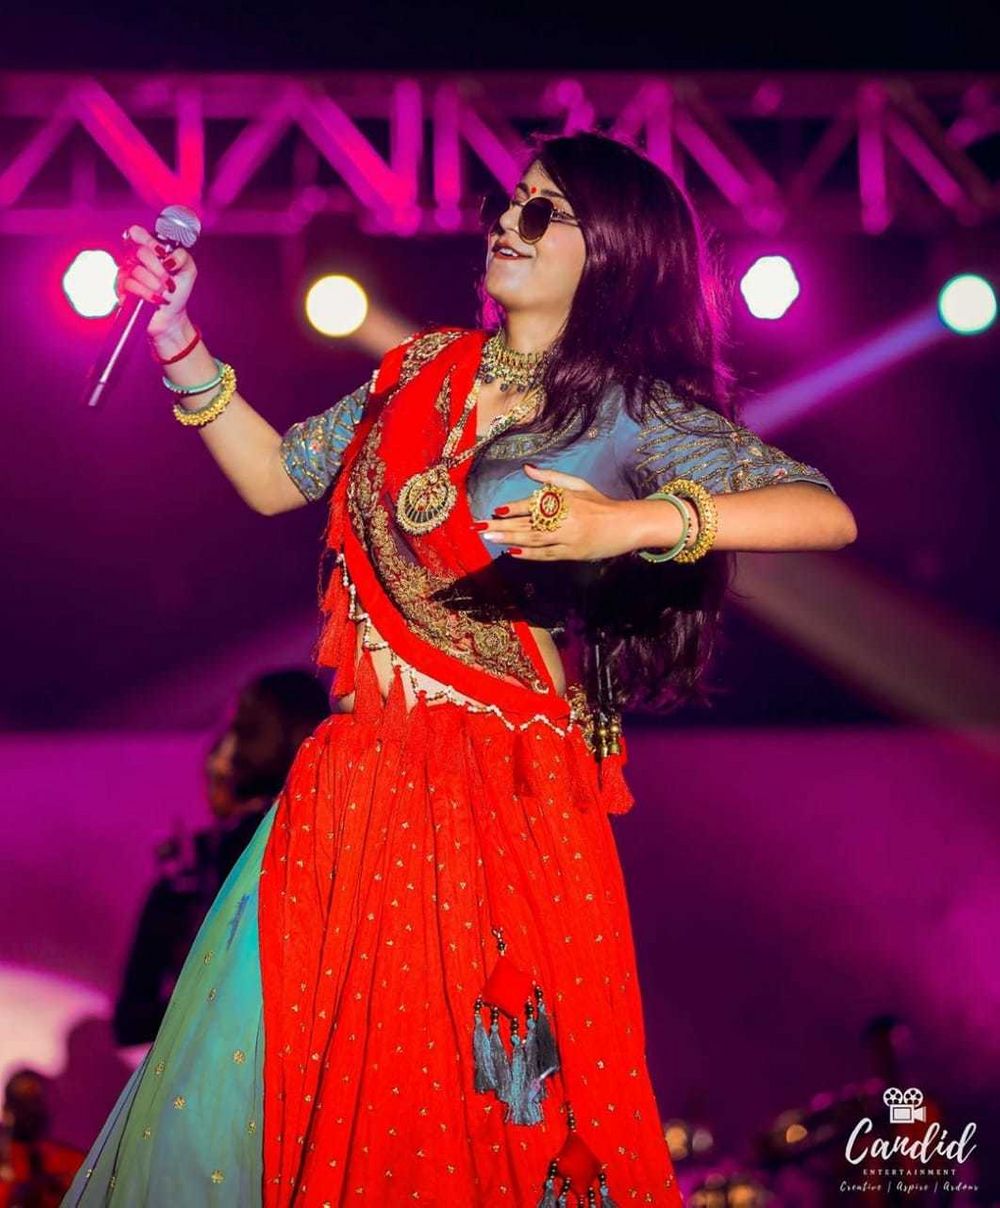 Photo From Kinjal Dave Concert - By Candid Entertainment